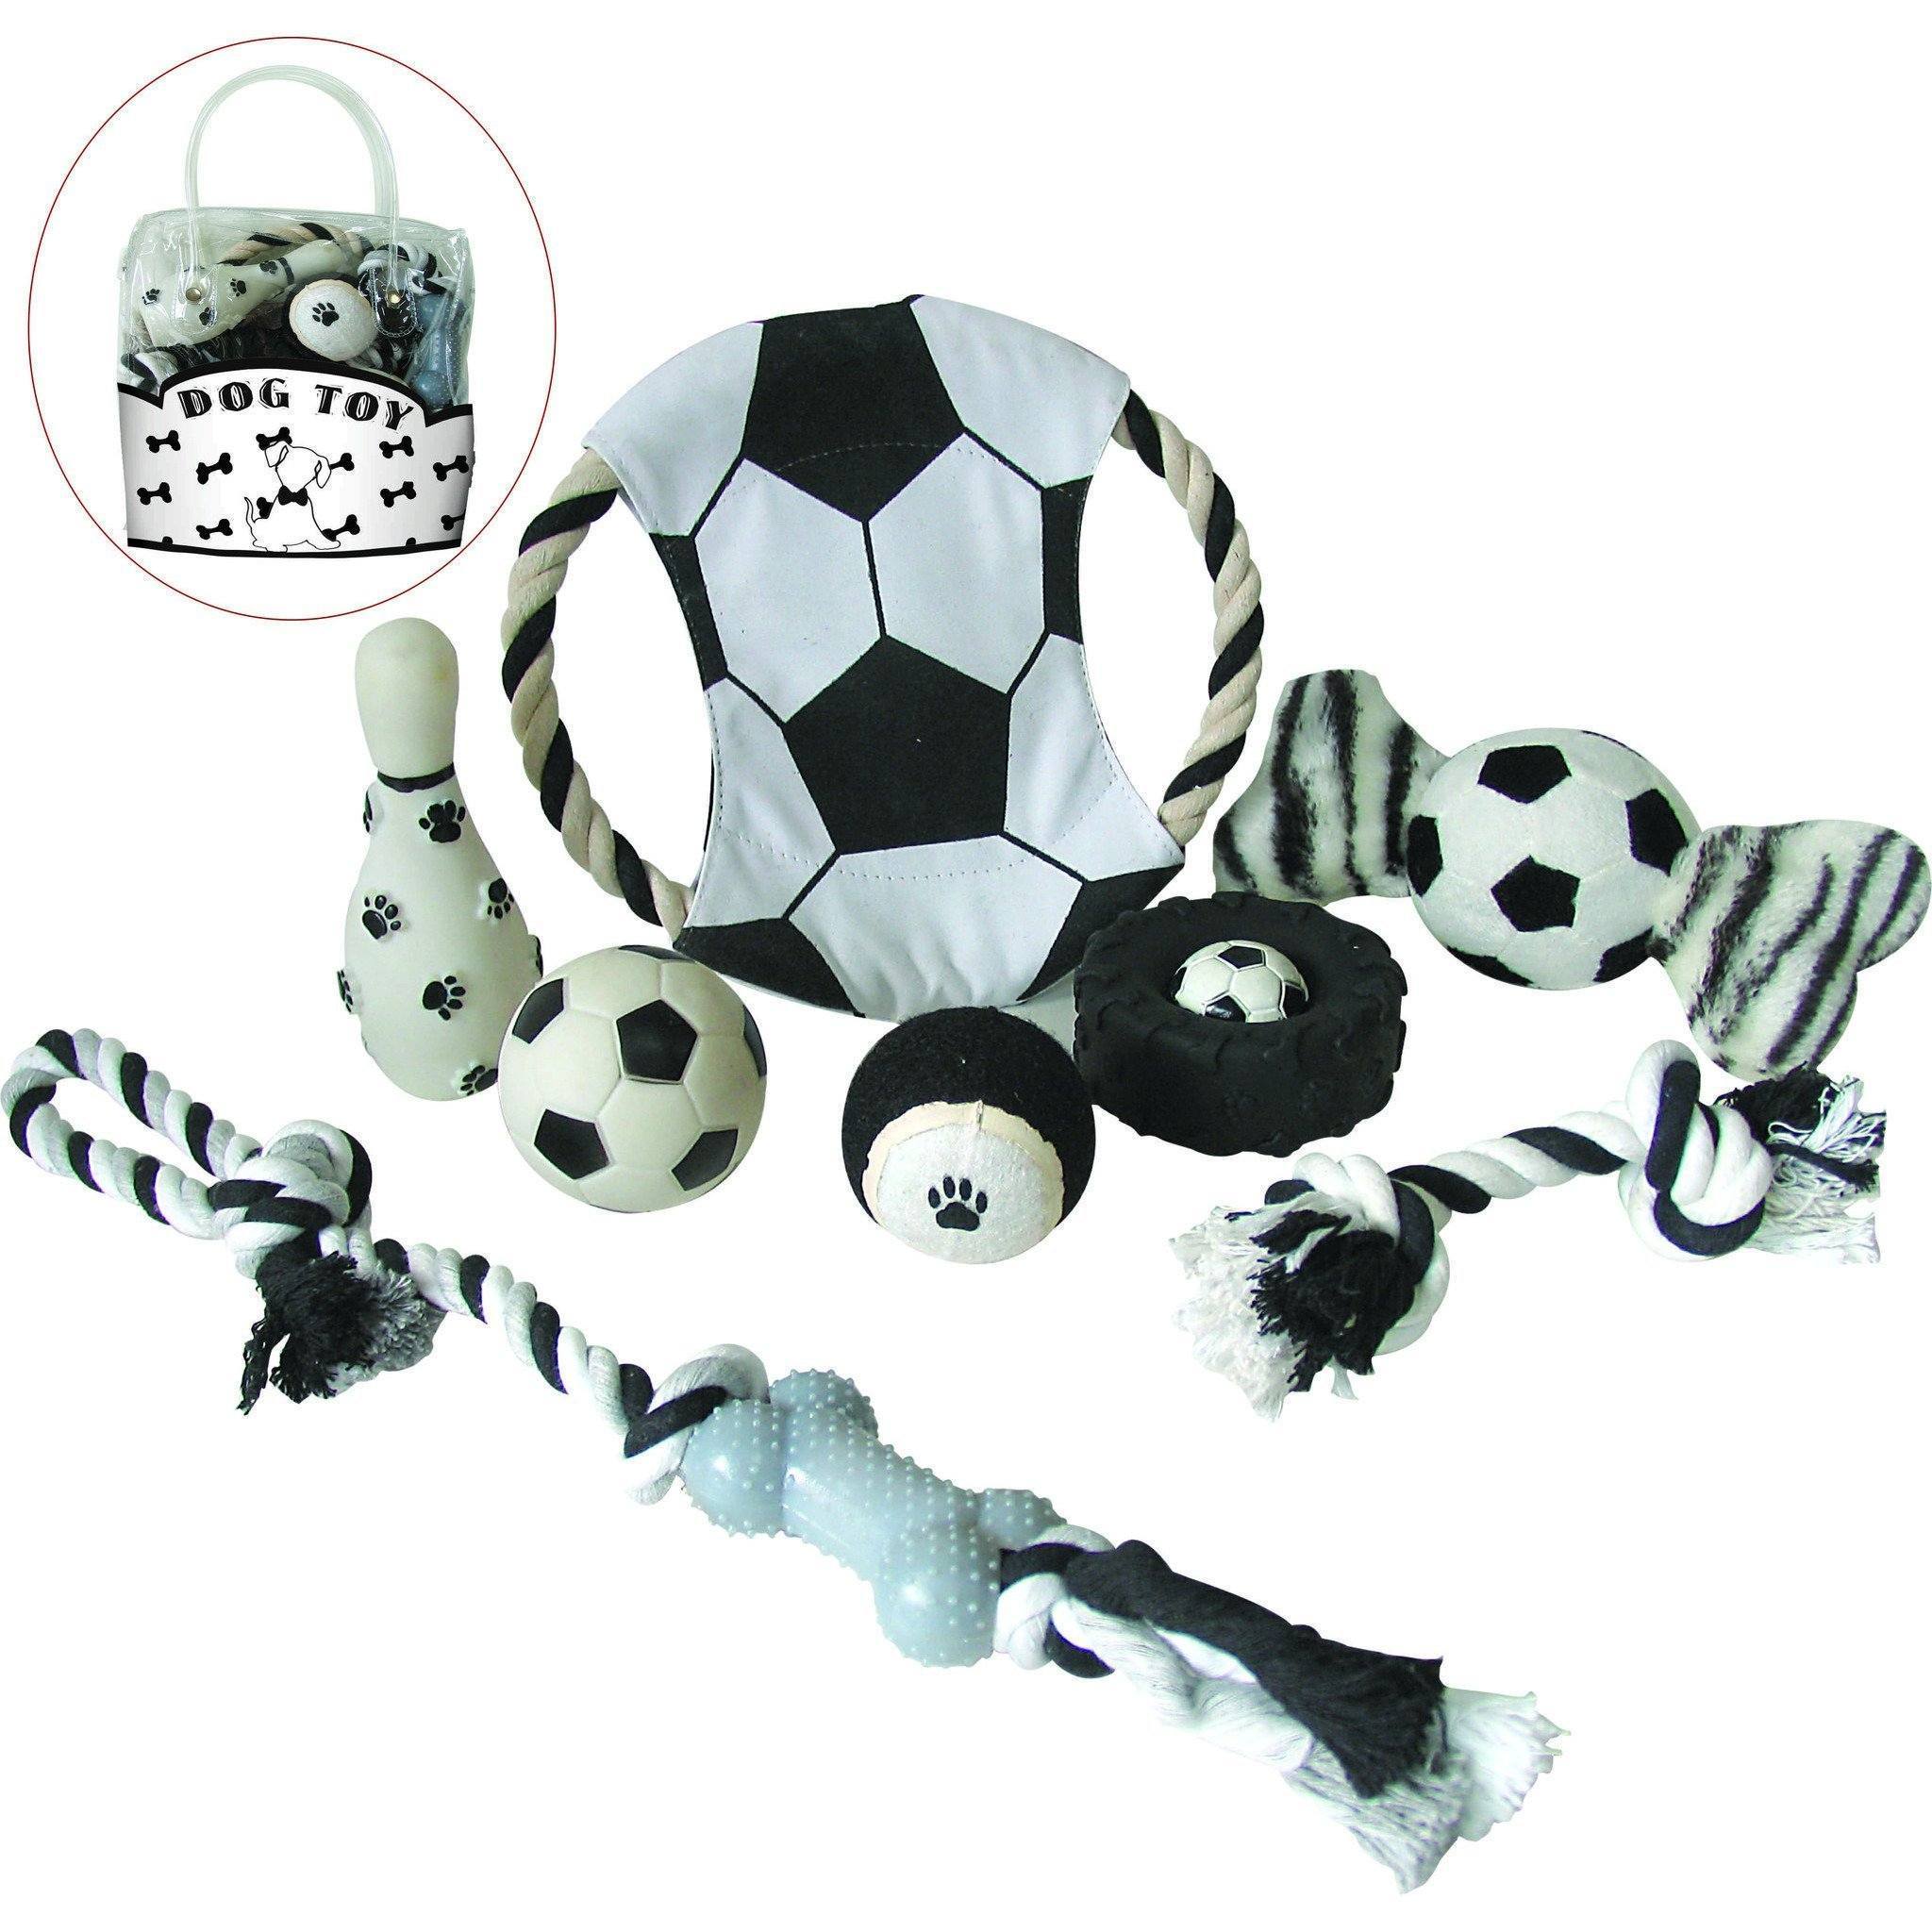 Pet Life ® 'Soccer Themed' 9 Piece Jute Rope and Rubberized Squeak Chew Pet Dog Toy Gift Set Default Title 